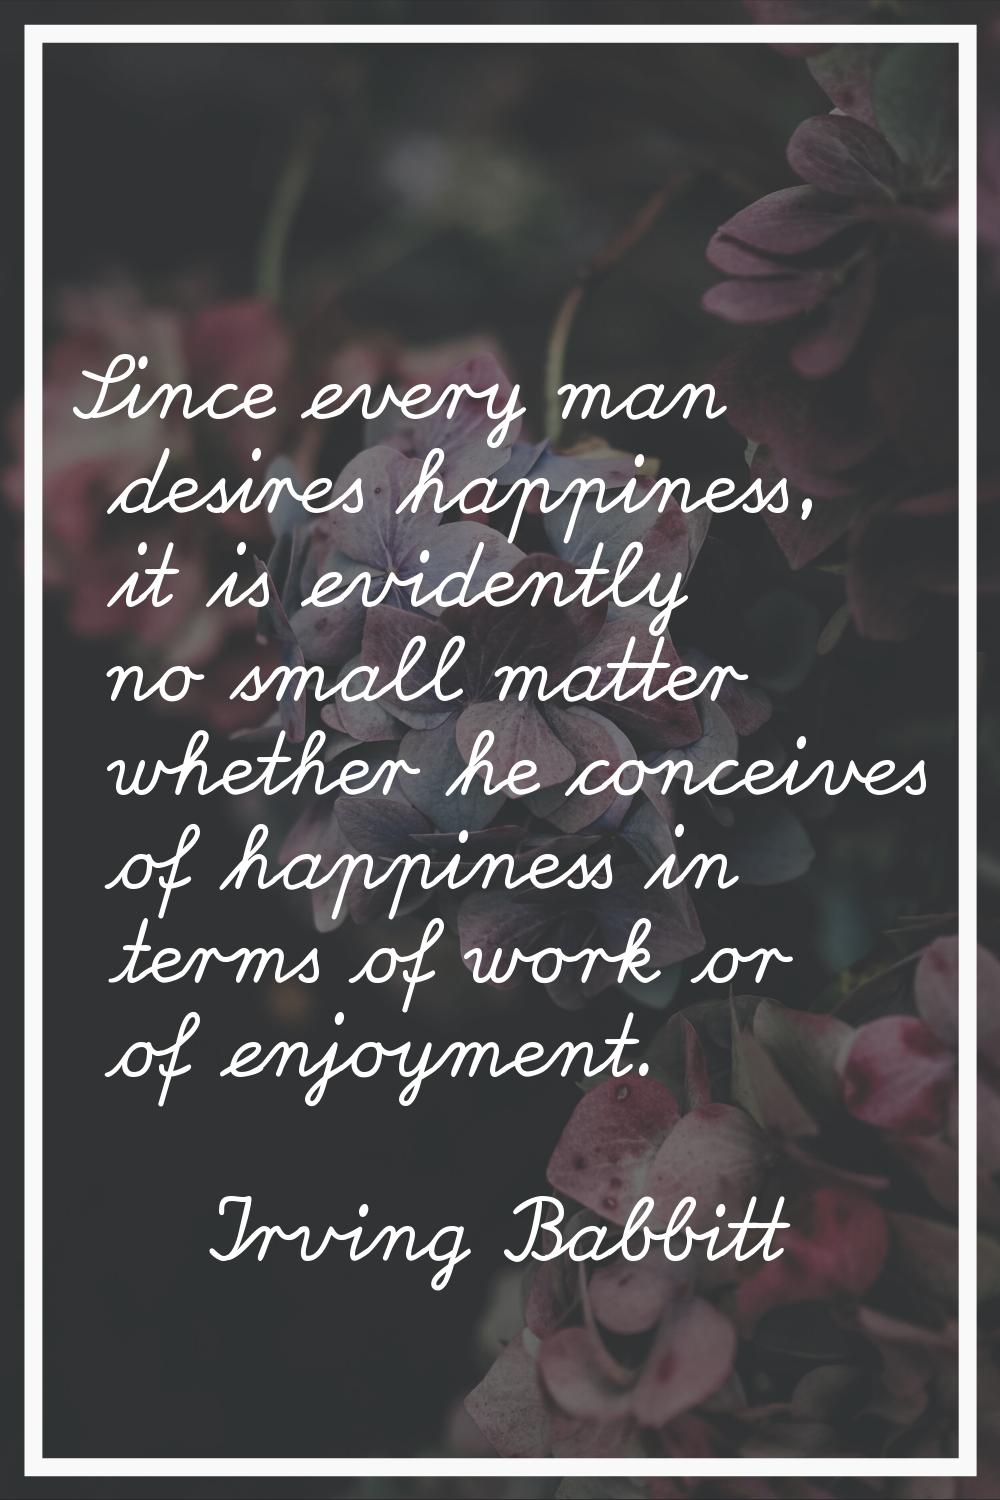 Since every man desires happiness, it is evidently no small matter whether he conceives of happines